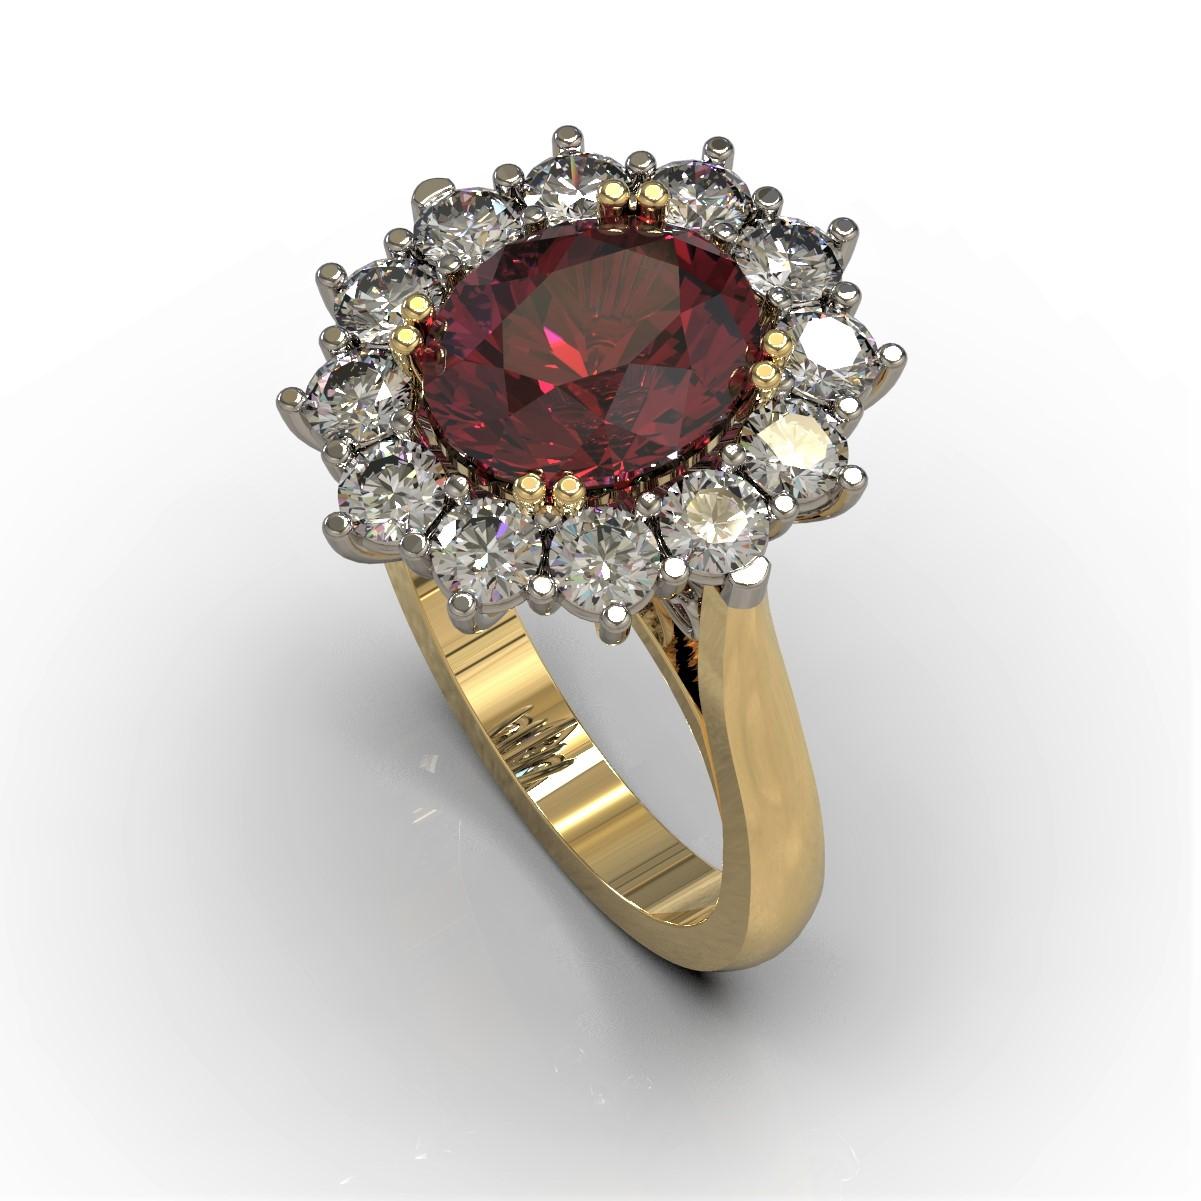 4.32 Carat Oval Rhodolite and Diamonds Cocktail Ring in Platinum & 18 Carat Gold For Sale 2